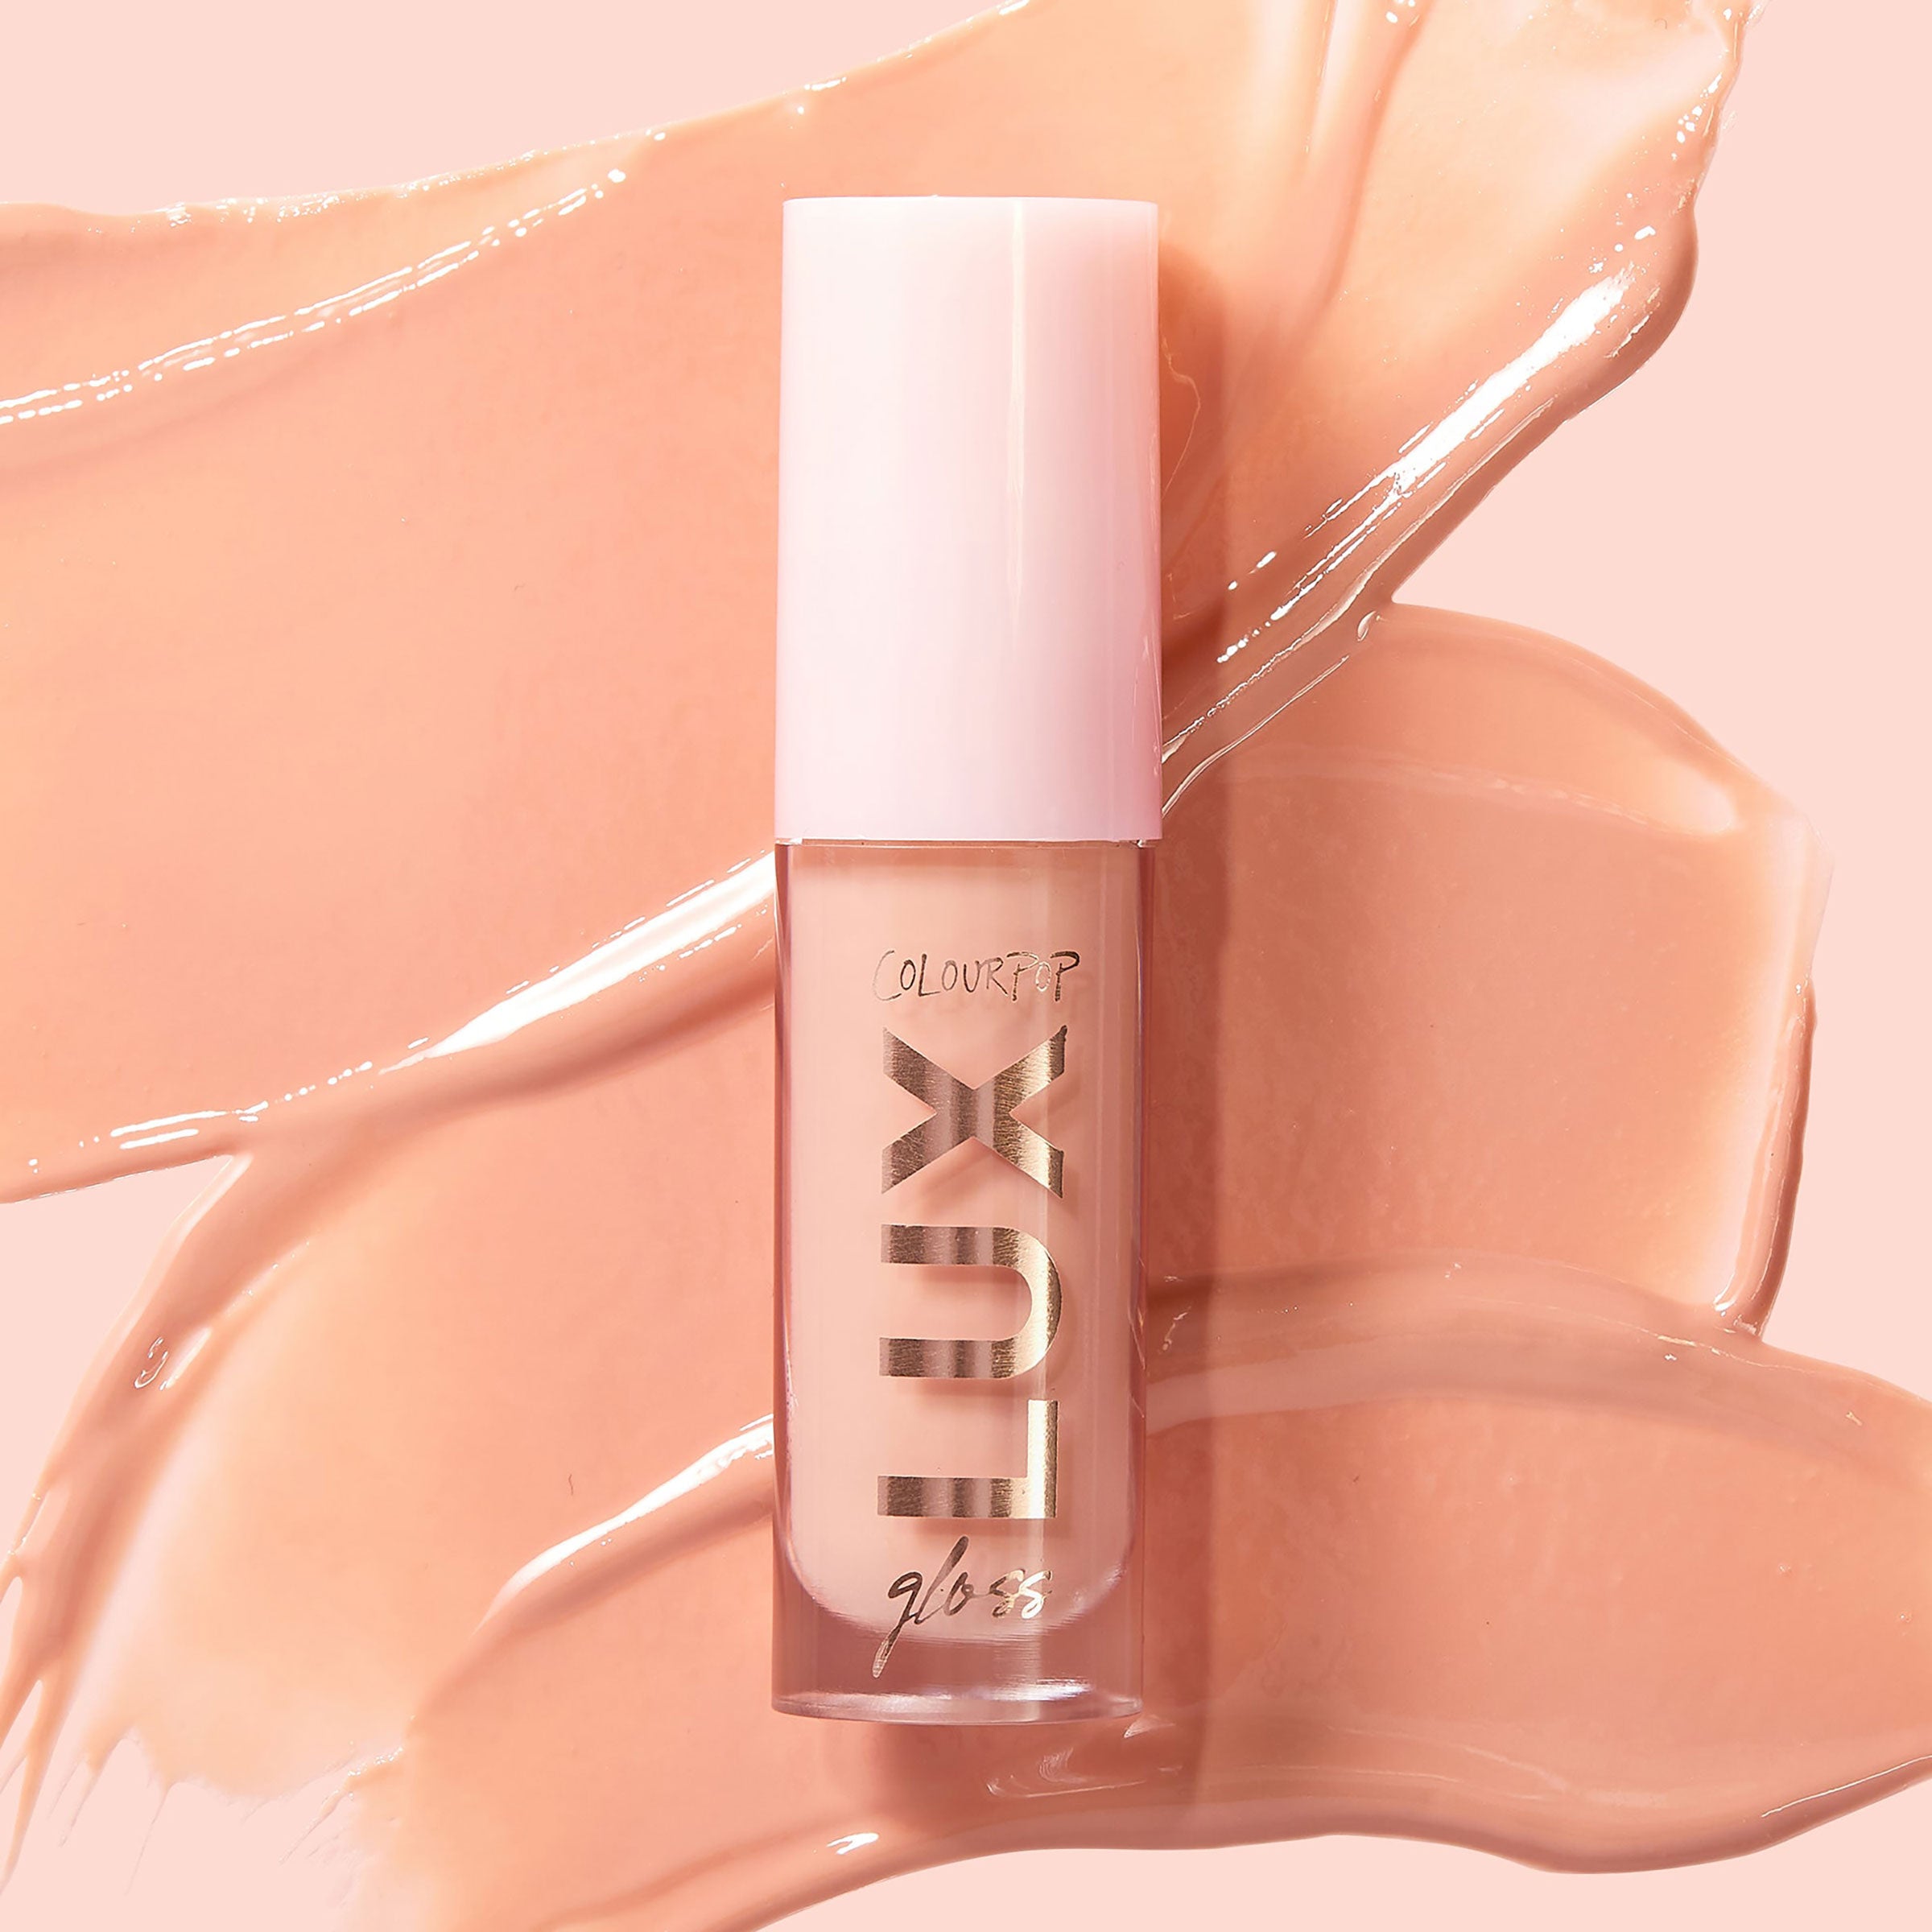 Just Cuddle lux liquid gloss , pale peachy nude shade with crème finish